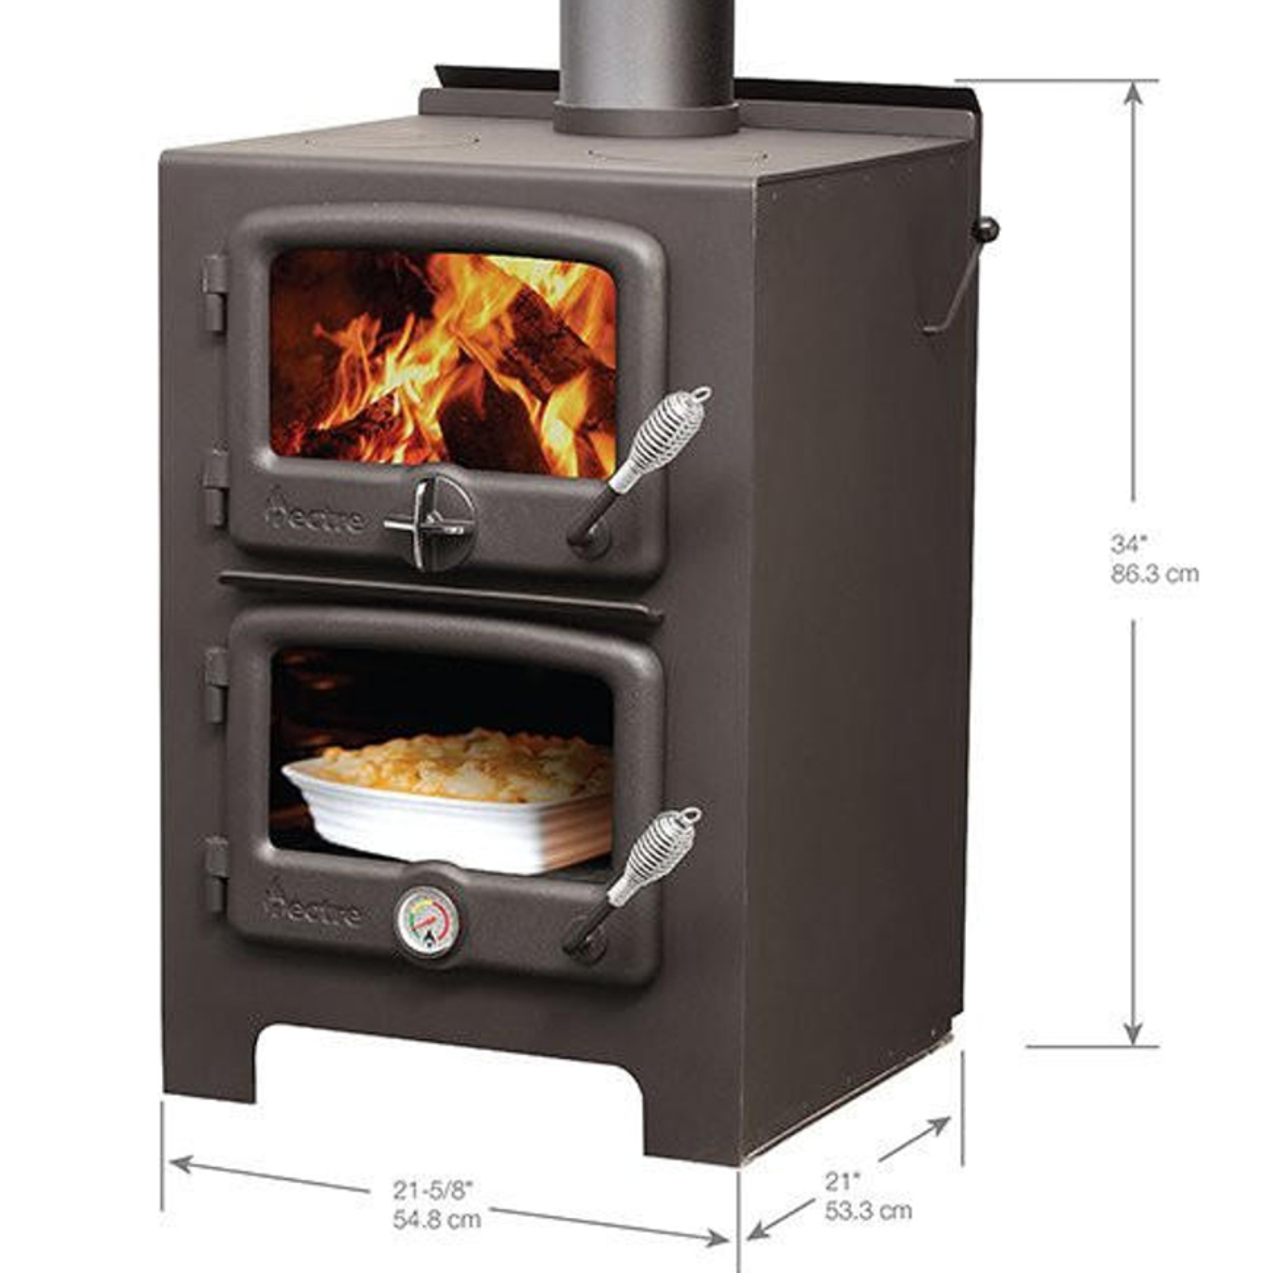 Wood Cookstove Cooking: Using a Stovetop Oven on a Wood Cookstove